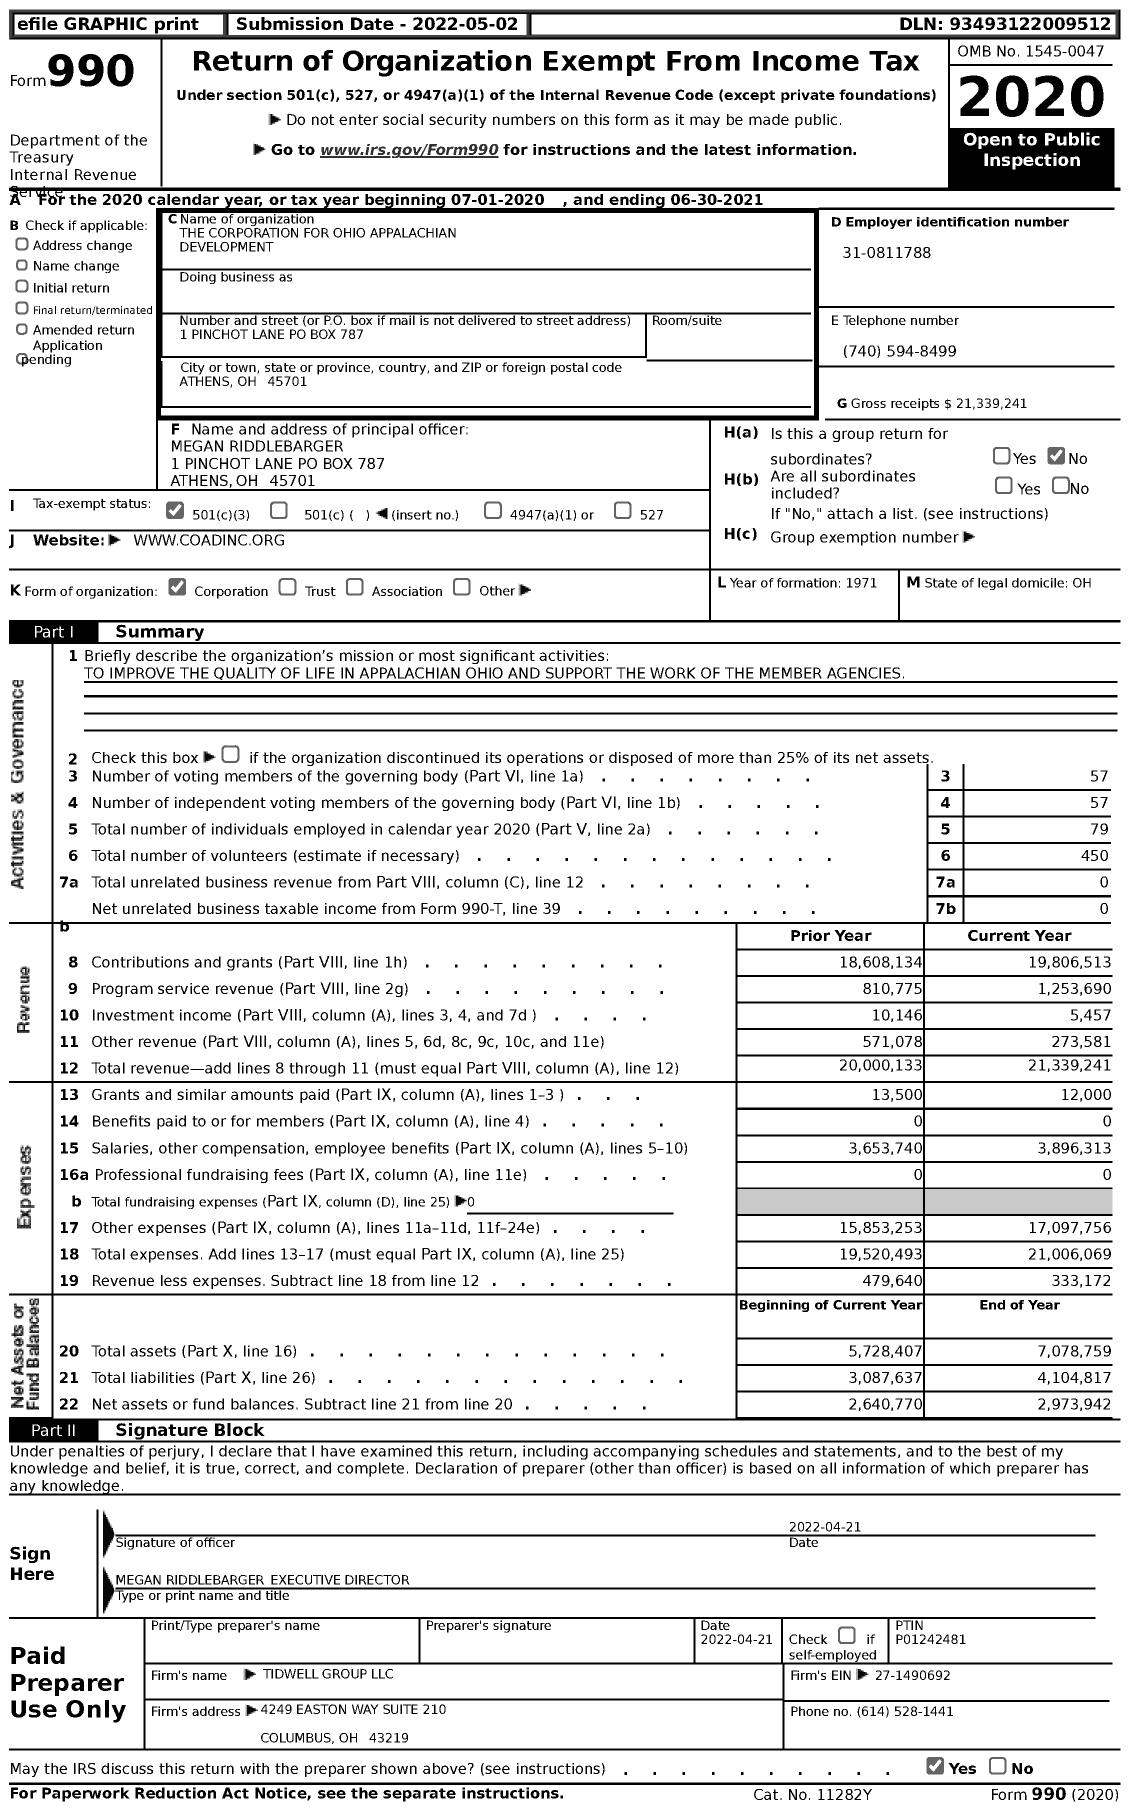 Image of first page of 2020 Form 990 for The Corporation for Ohio Appalachian Development (COAD)